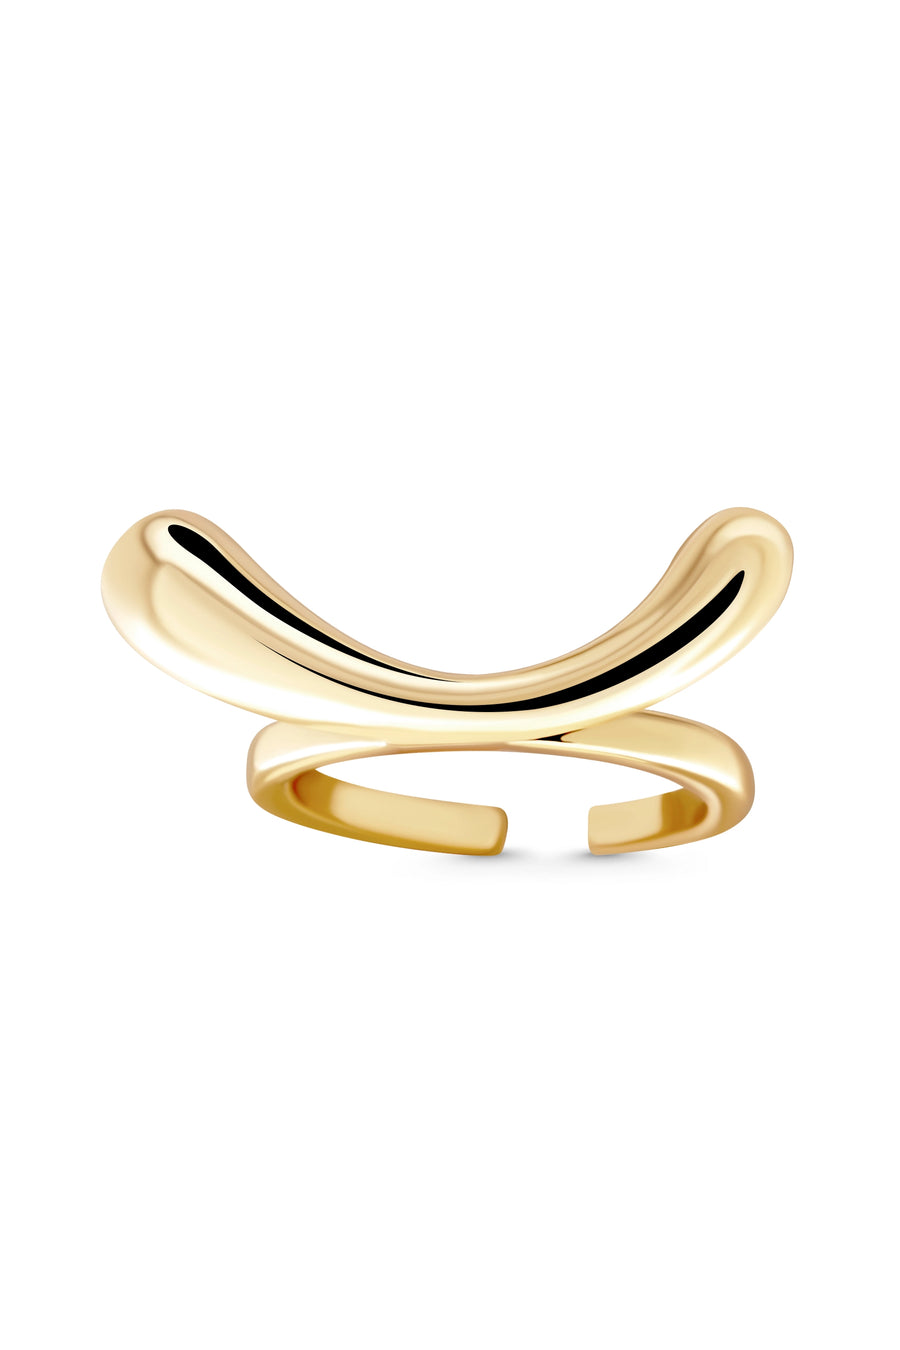 MOOD Ring. Bow-shaped top ring, open-ended, can fit on US sizes 5-7, 18K gold vermeil, handmade, hypoallergenic, water-resistant